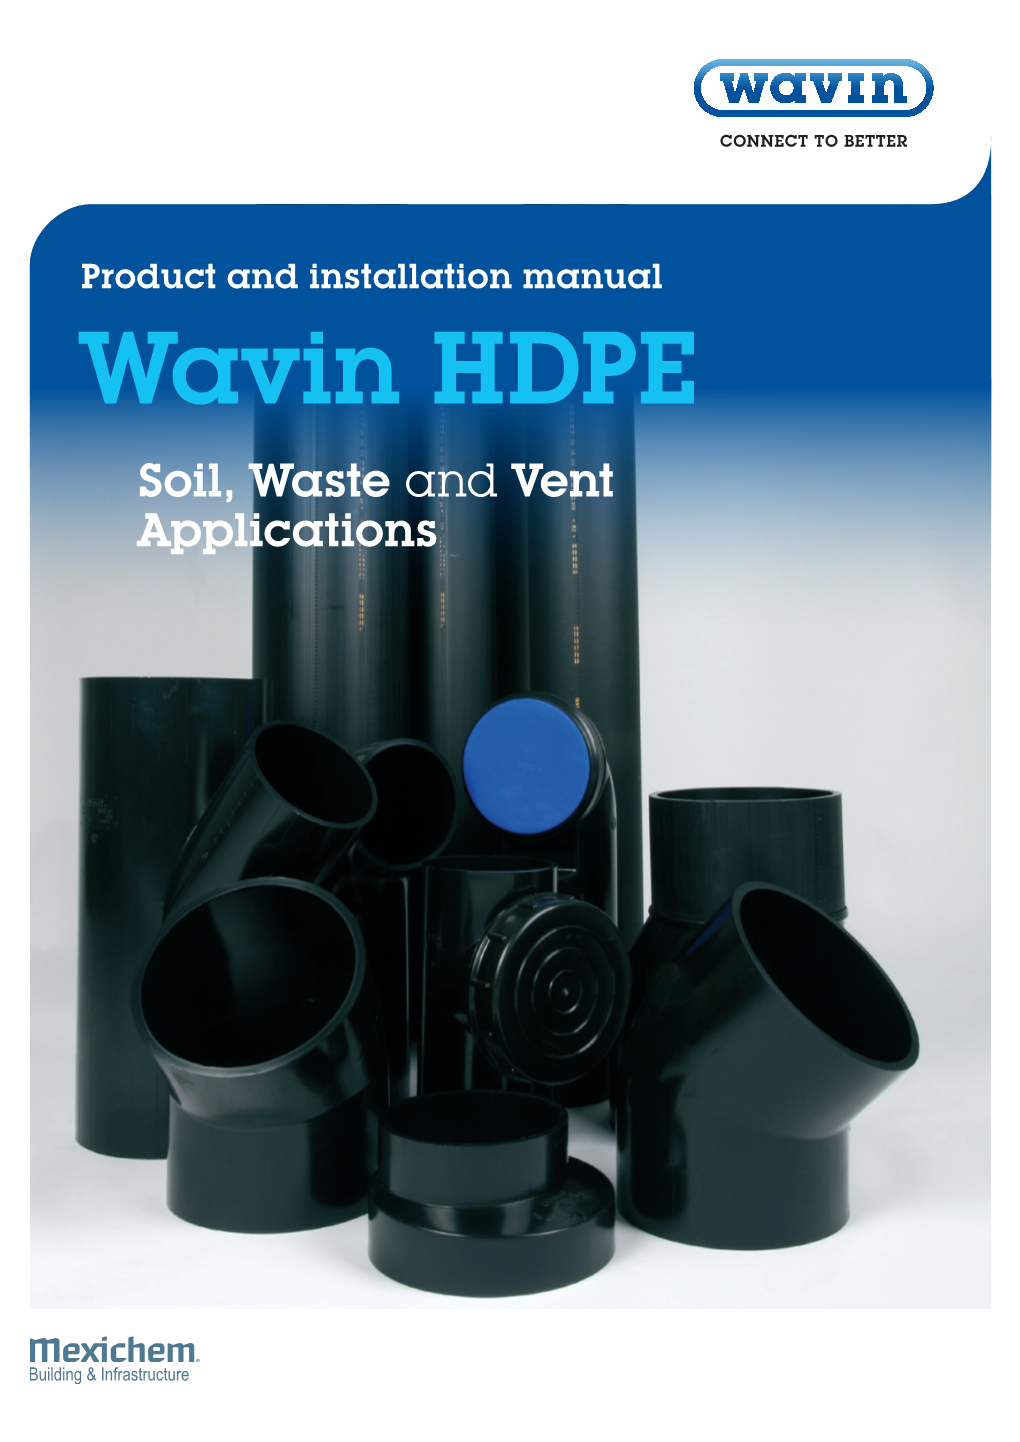 Product and Installation Manual Wavin HDPE Soil, Waste and Vent Applications Contents Wavin HDPE